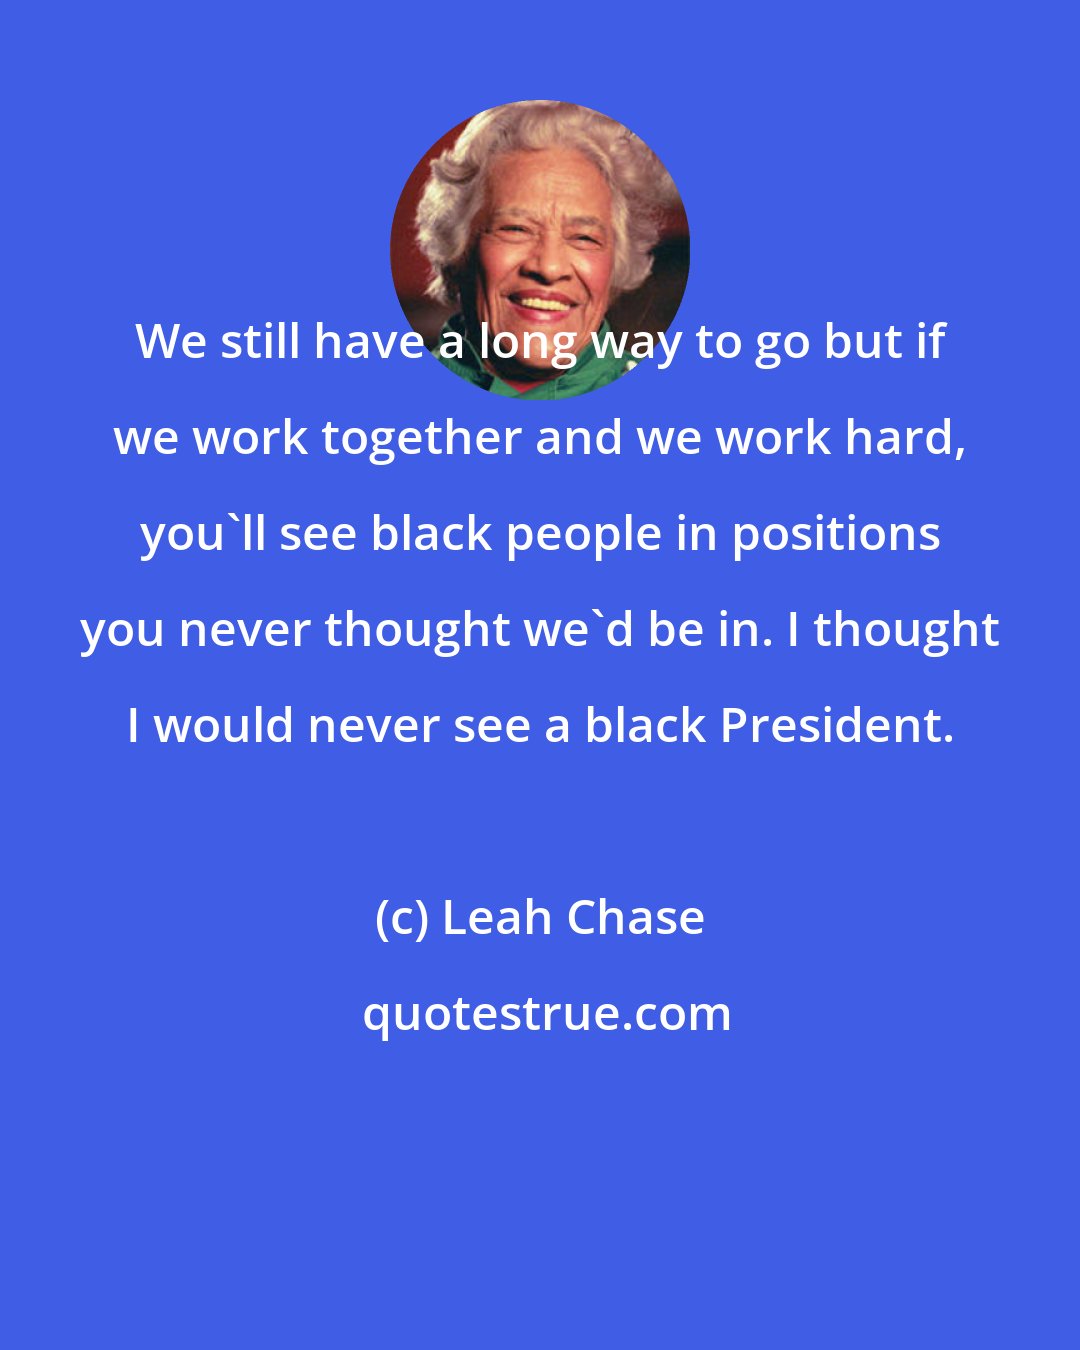 Leah Chase: We still have a long way to go but if we work together and we work hard, you'll see black people in positions you never thought we'd be in. I thought I would never see a black President.